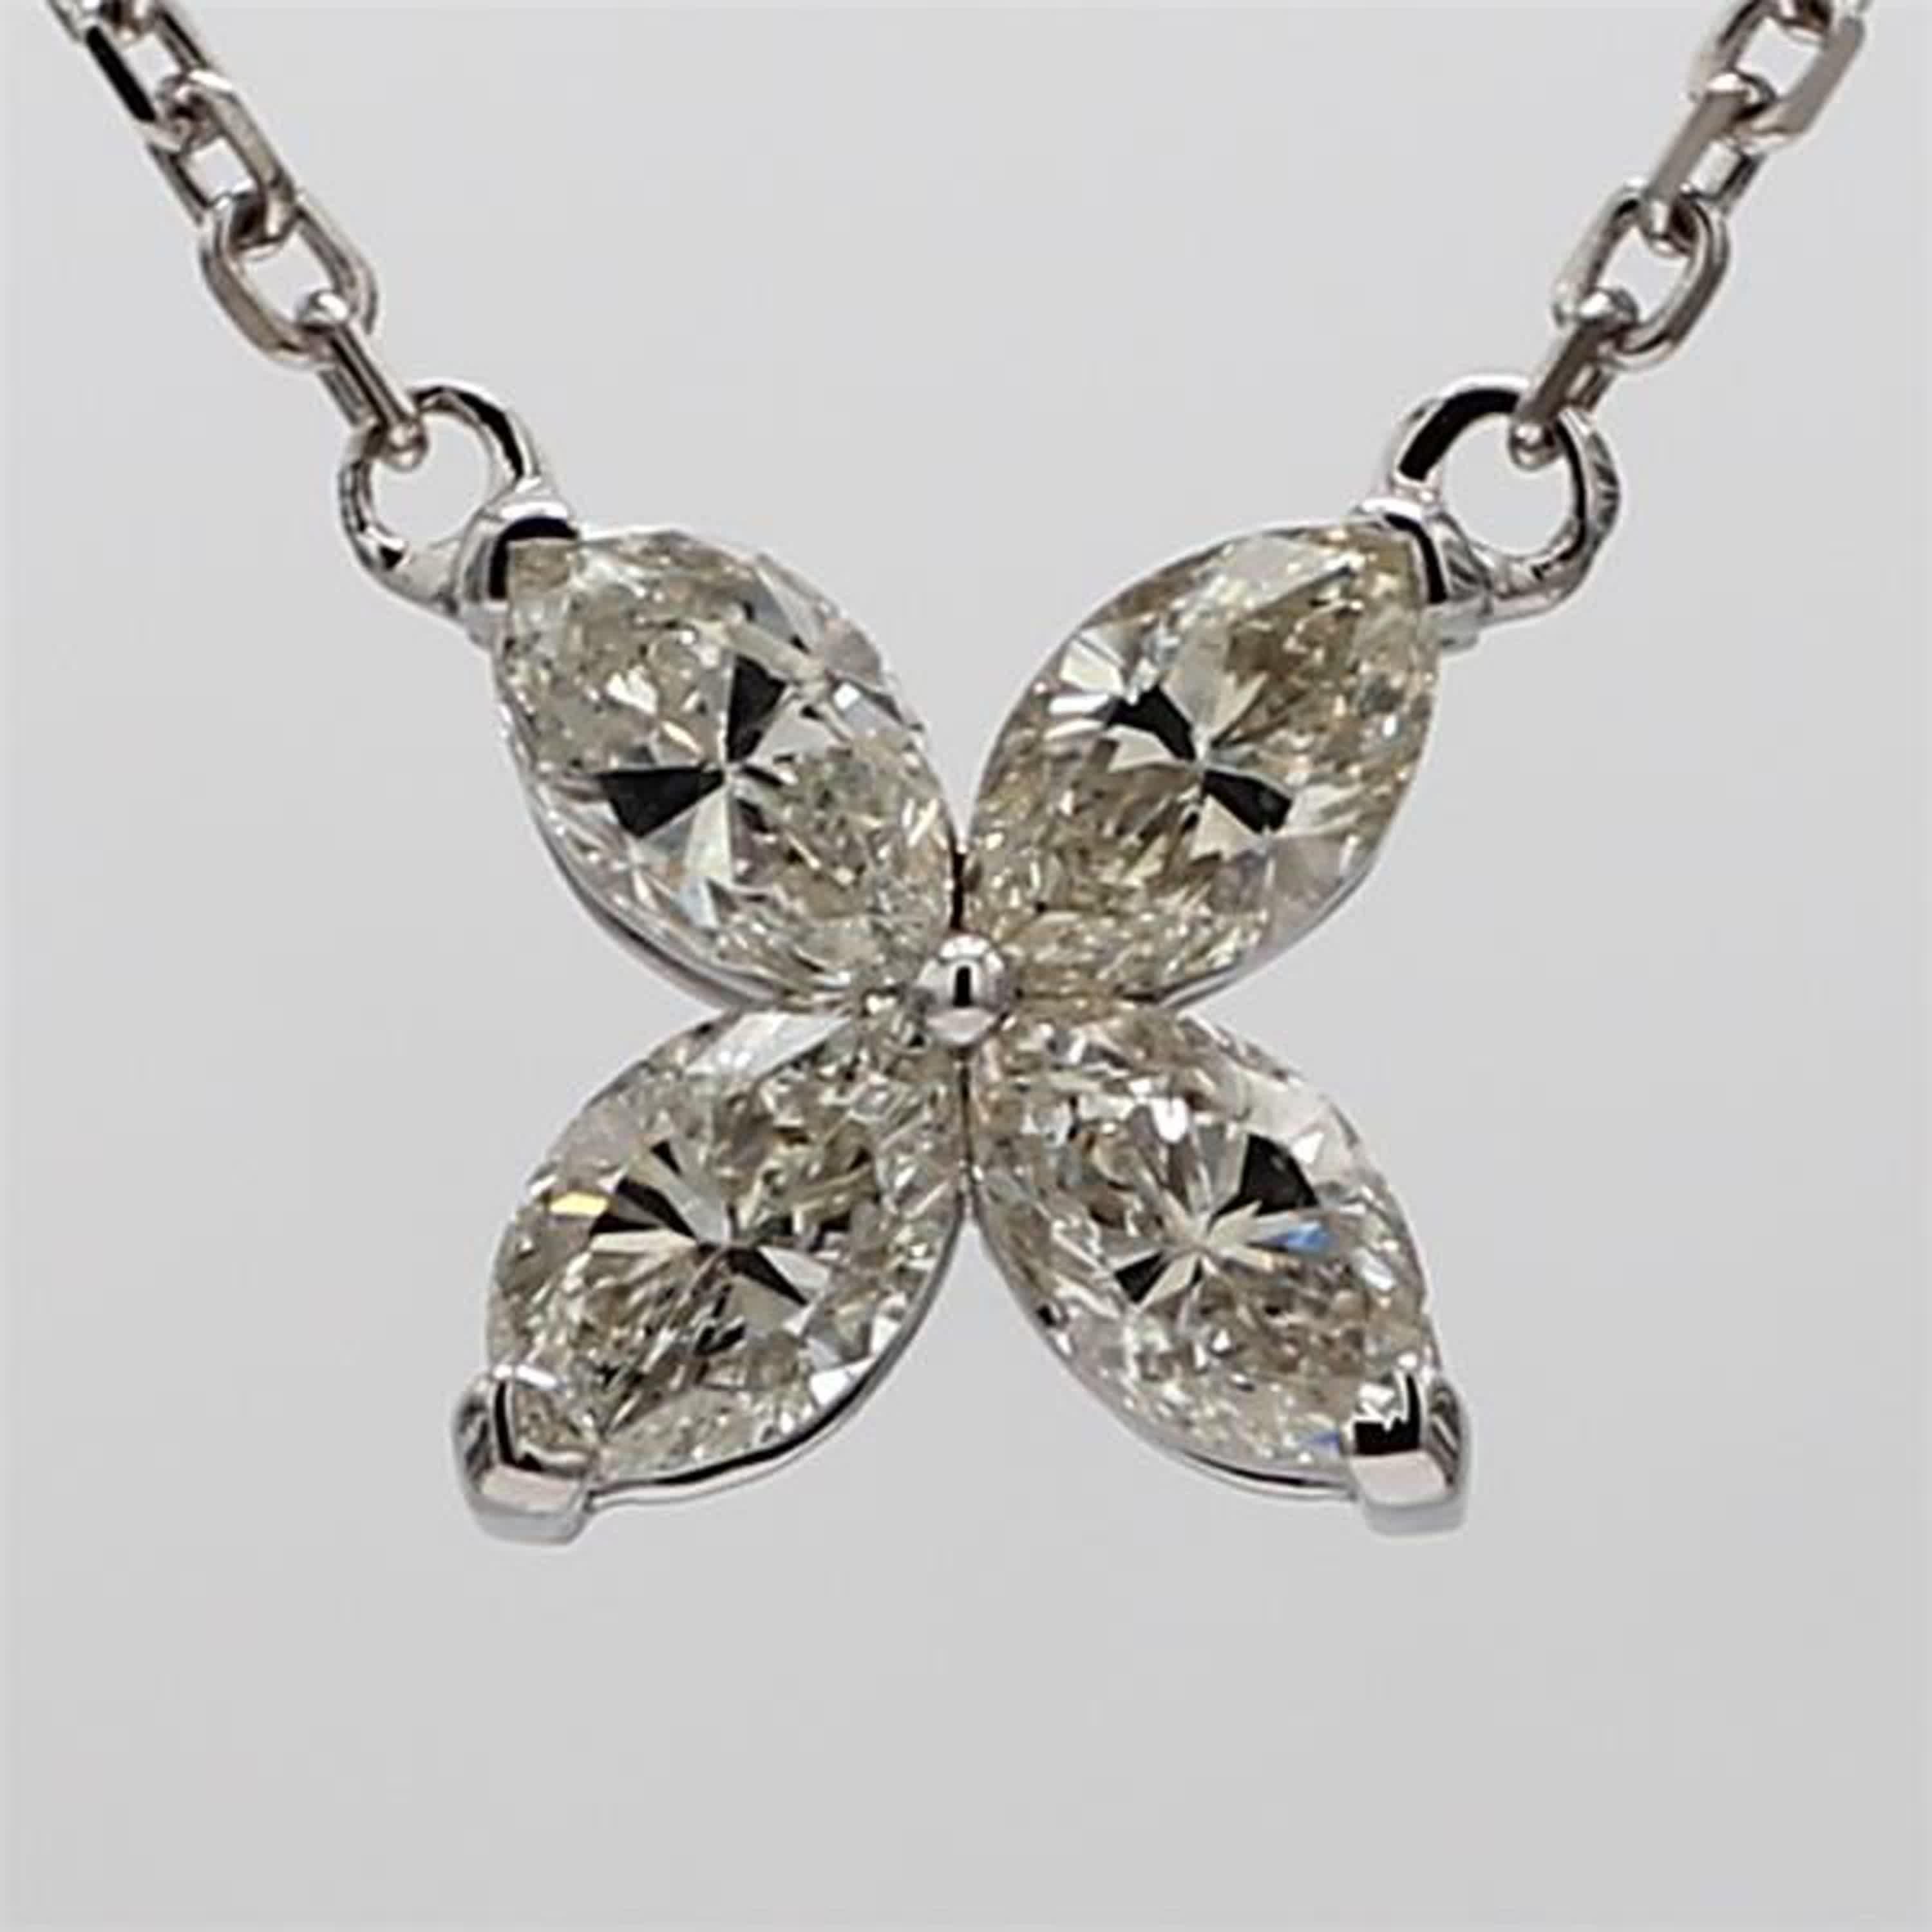 RareGemWorld's classic diamond necklace. Mounted in a beautiful 18K White Gold setting with natural marquise cut white diamonds. This necklace is guaranteed to impress and enhance your personal collection.

Total Weight: .94cts

Diamond